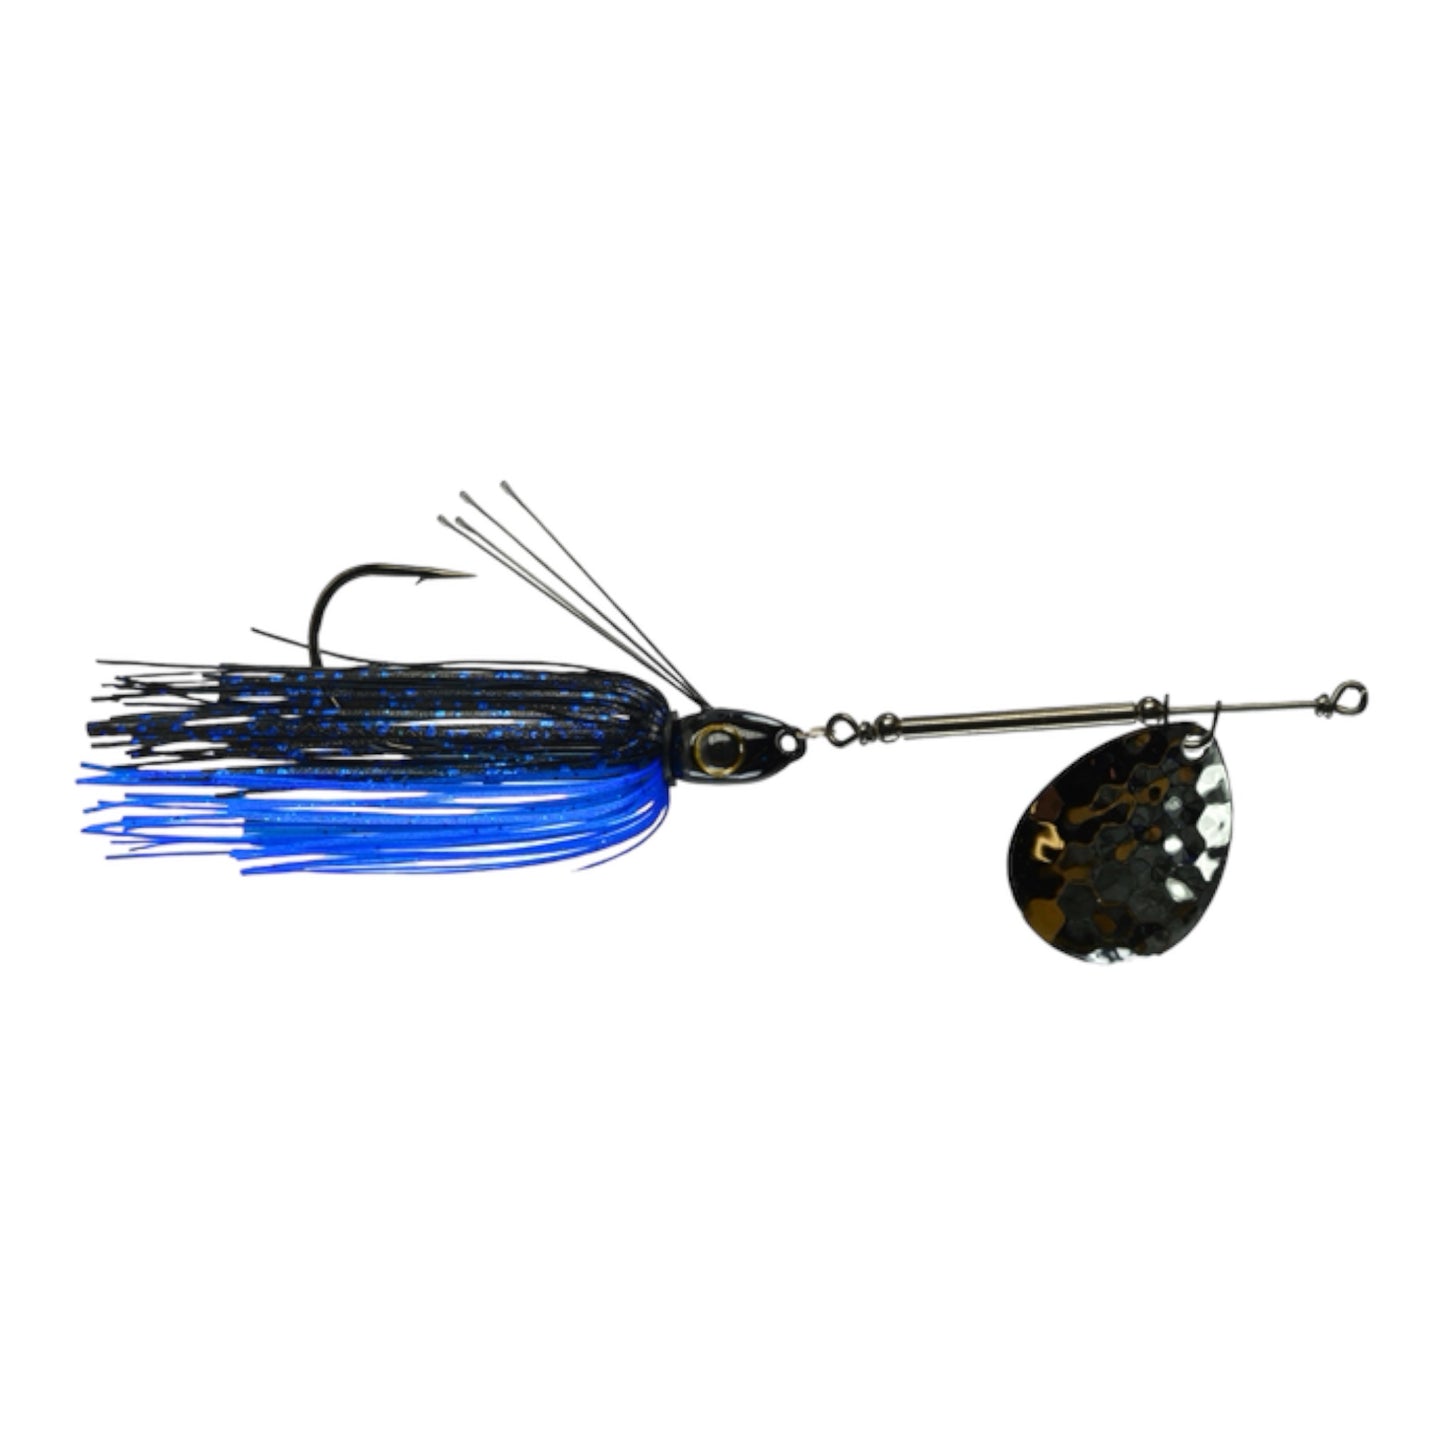 Picasso Lures All-Terrain Weedless Inline Spinner Jig